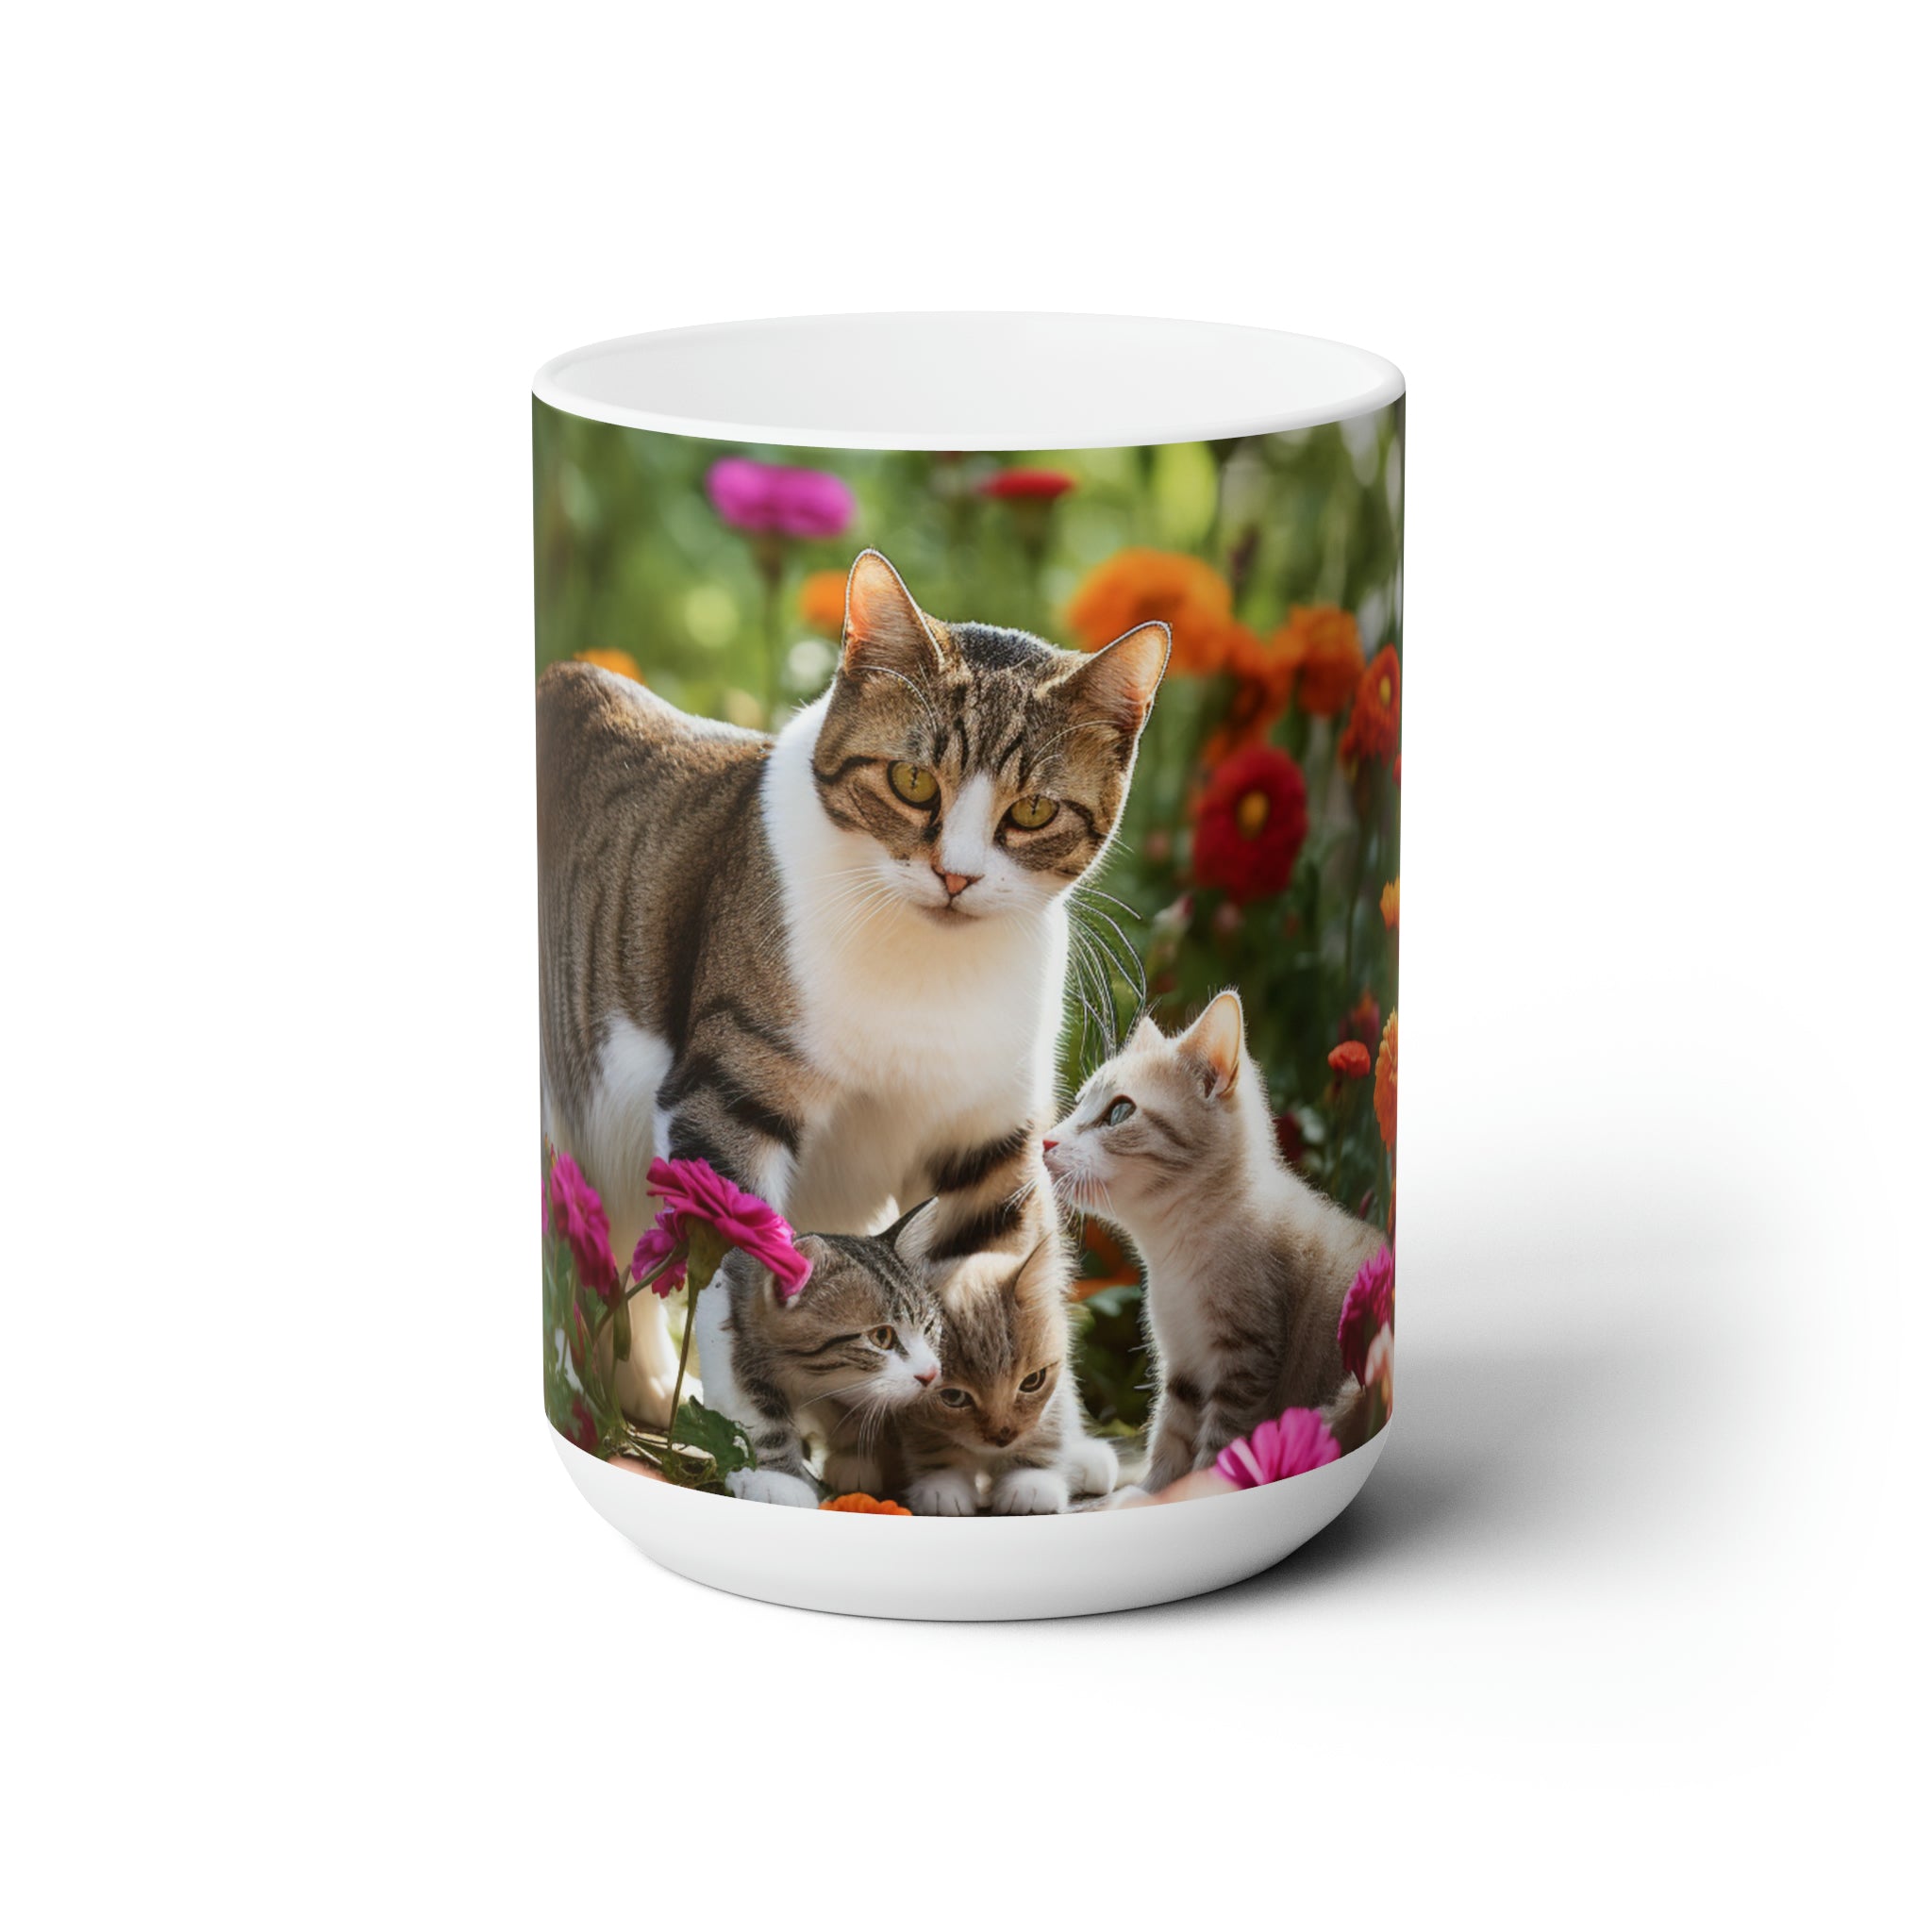 Whimsical Pet-Inspired Exquisite Garden Cat Feline Party Ceramic Mug 15oz - Drinkware for Cat Lovers, Trendy Home Decor, and Coffee Moments